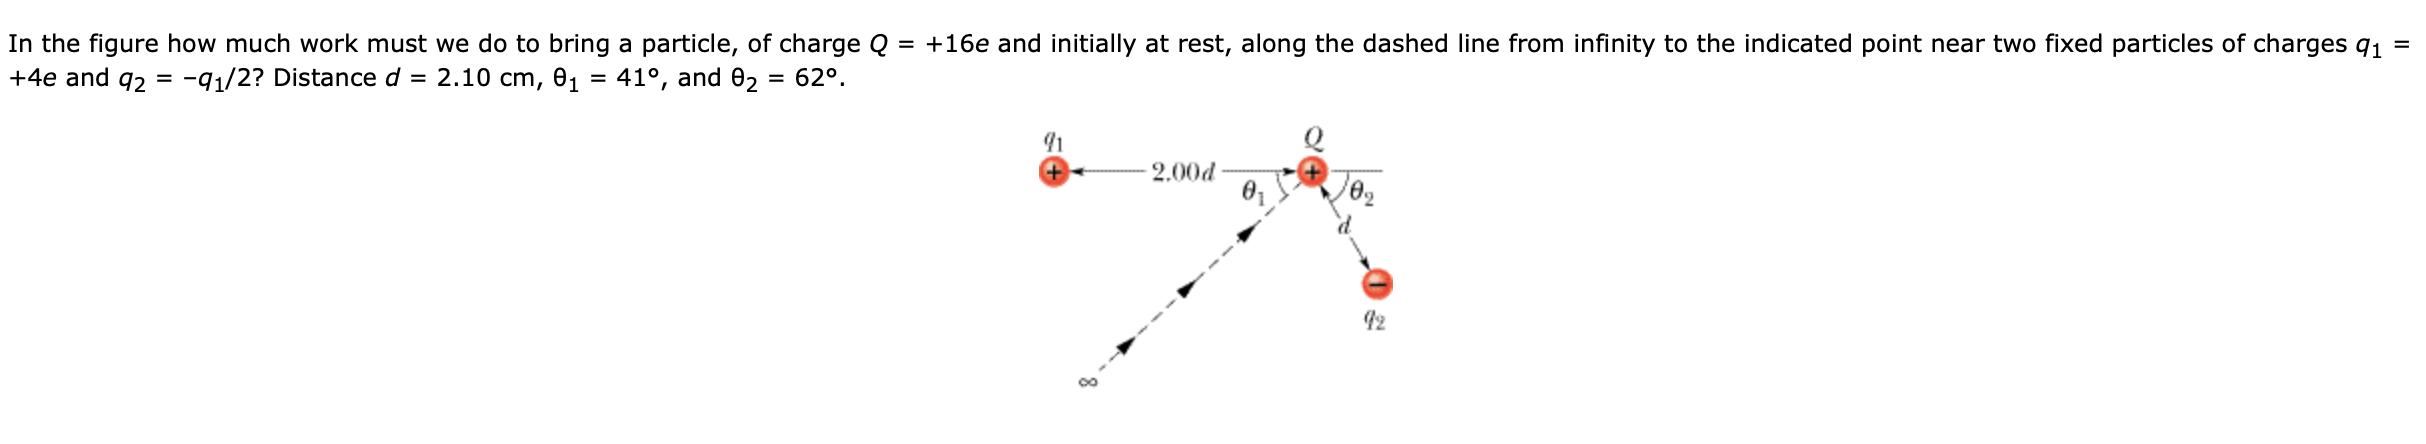 In the figure how much work must we do to bring a particle, of charge Q
41°, and 02 = 62°.
+16e and initially at rest, along the dashed line from infinity to the indicated point near two fixed particles of charges q1
%D
+4e and q2 = -q1/2? Distance d = 2.10 cm, 01
%3D
2.00d
в,
ө,
42
